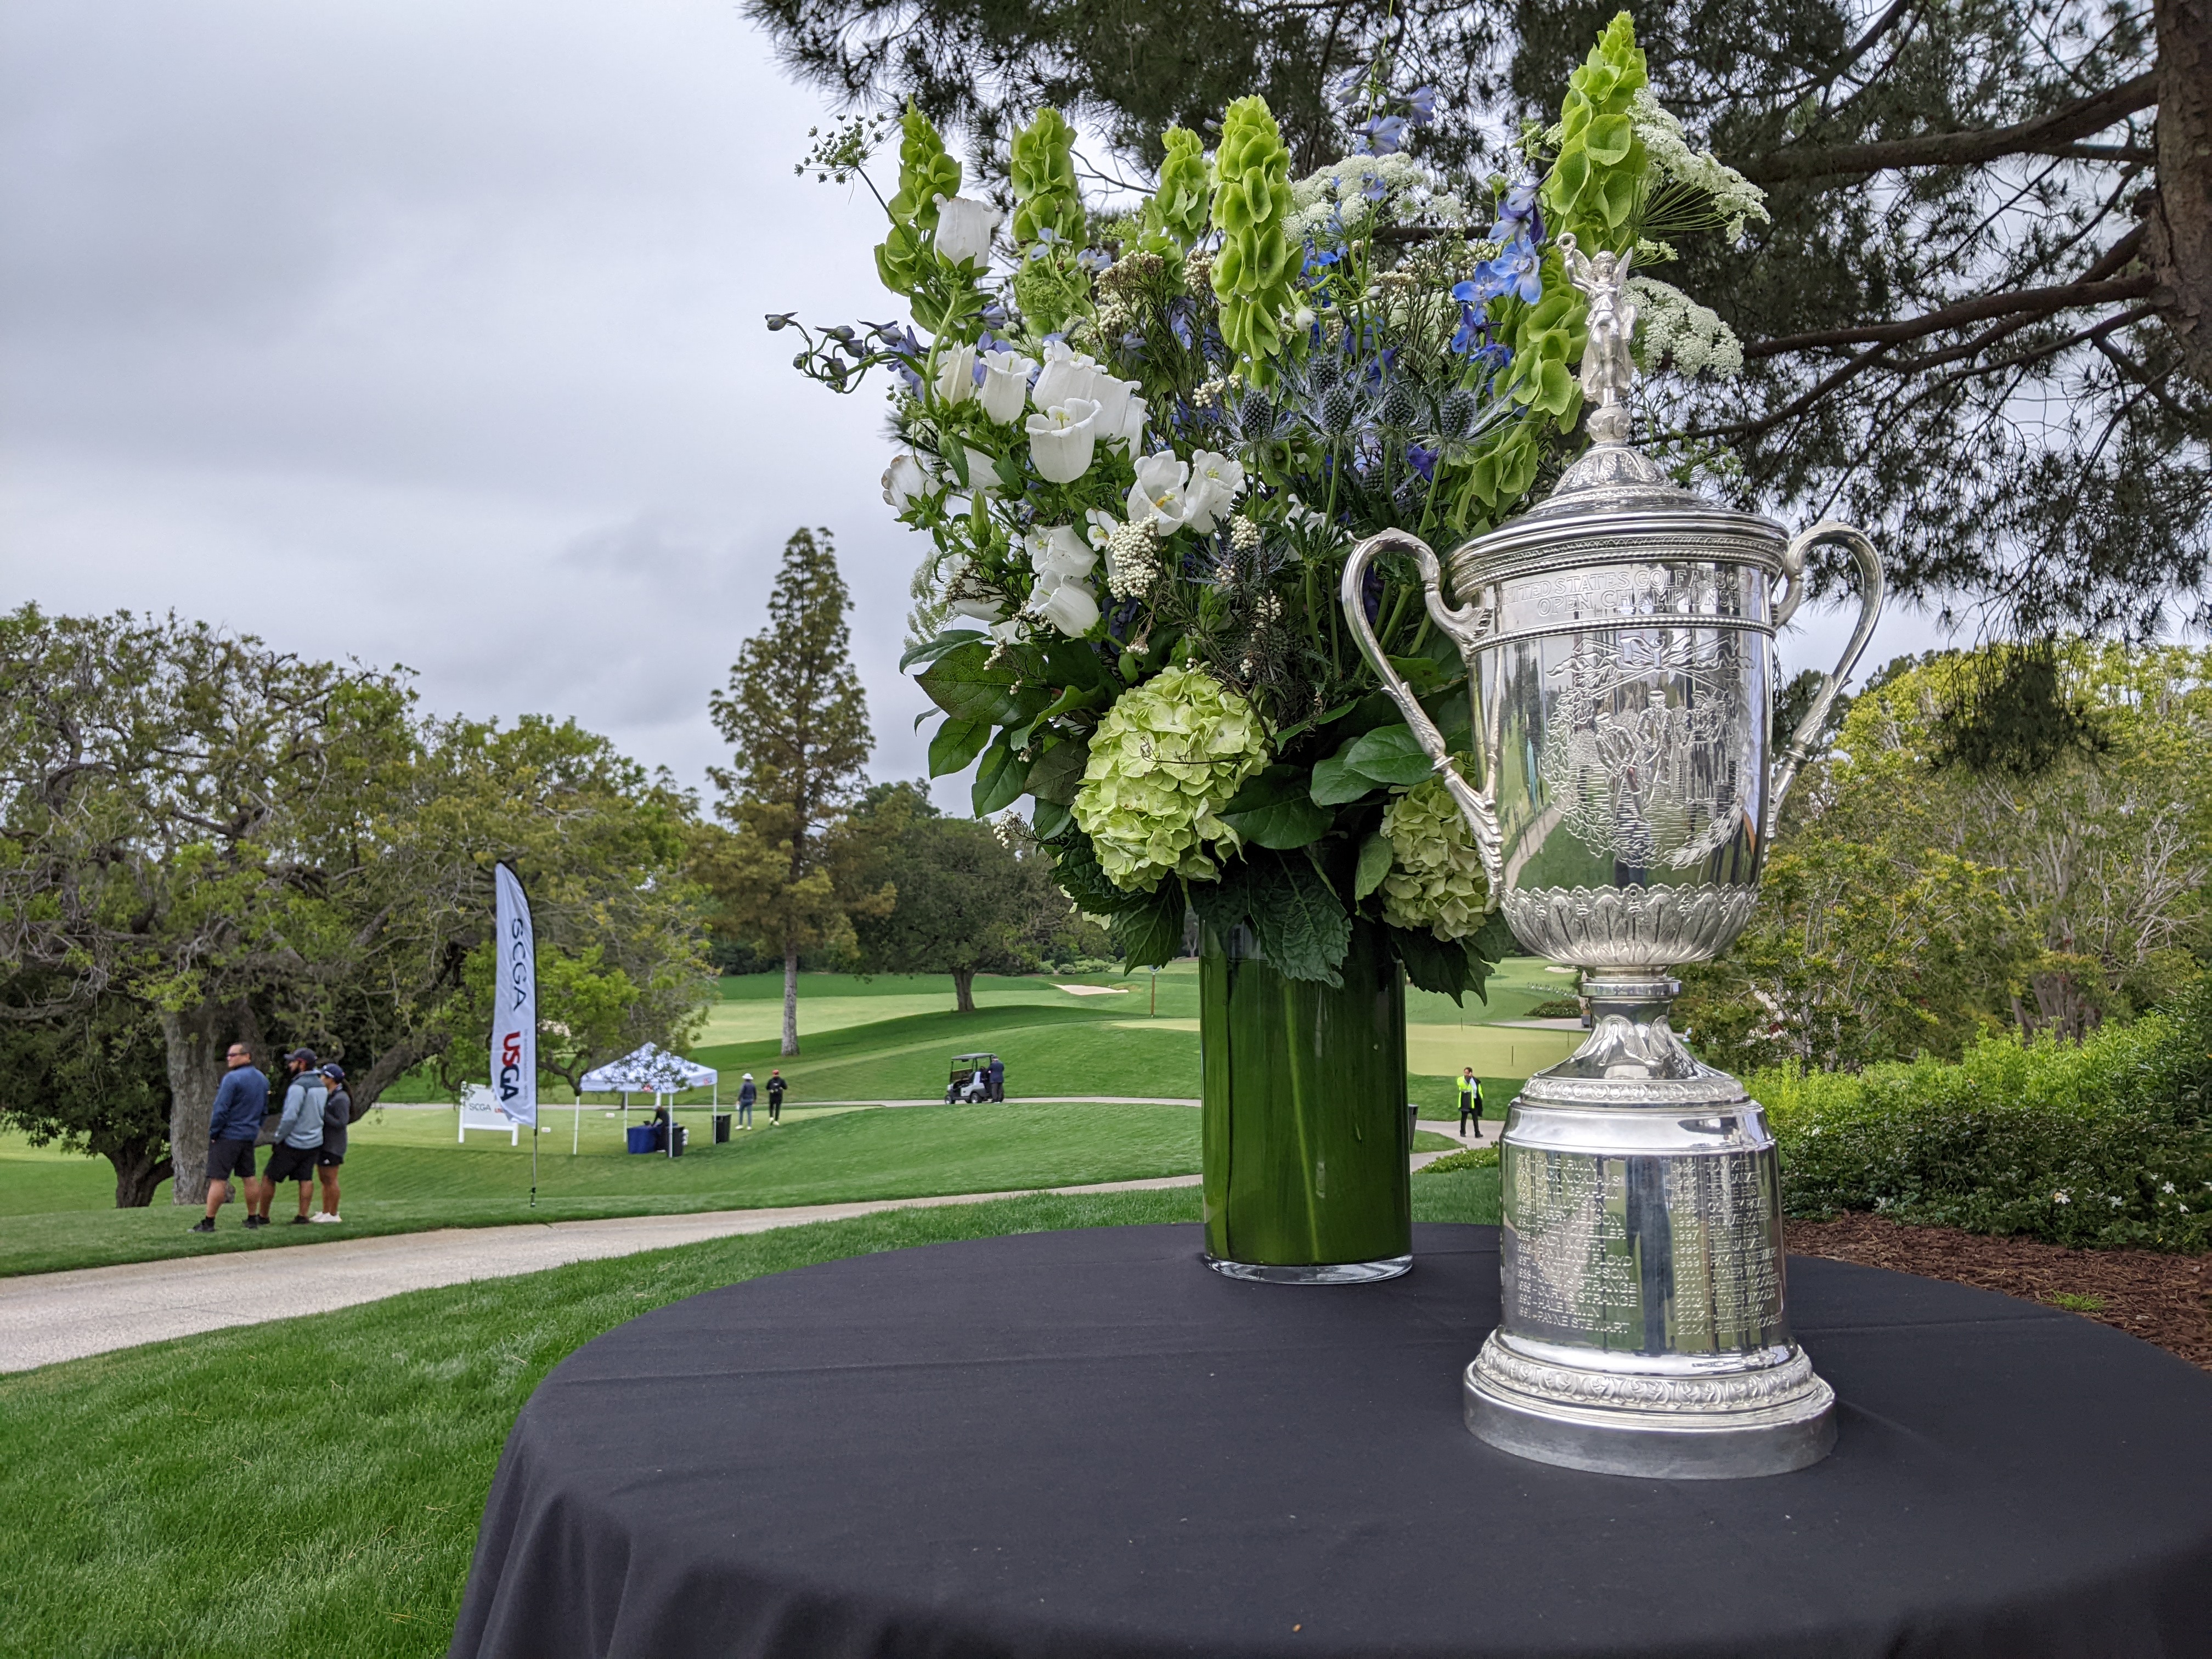 Final six added to the field for the 123rd U.S. Open